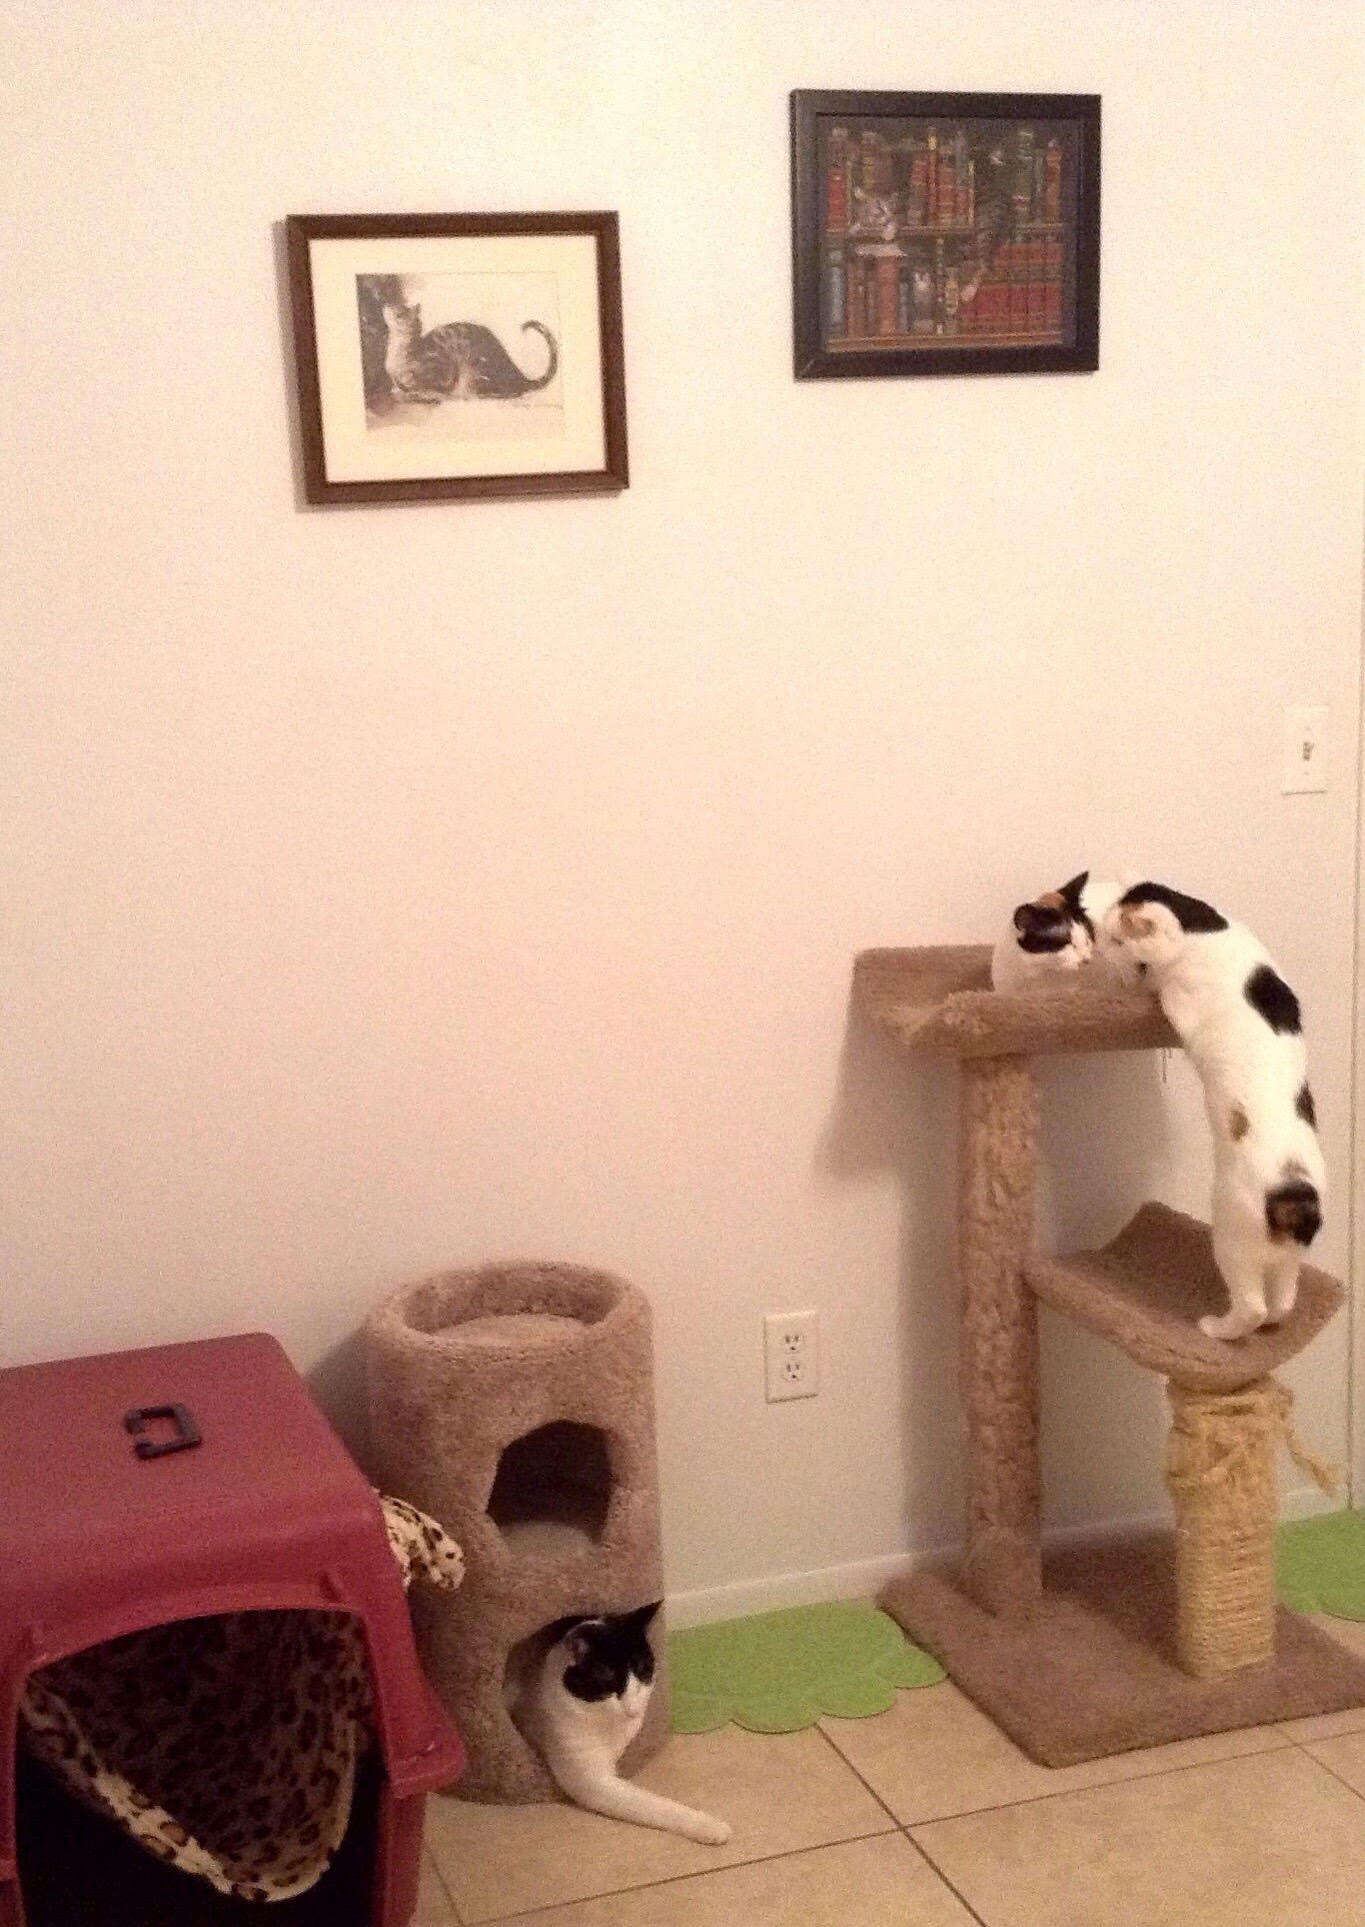 Kittens playing in cat houses